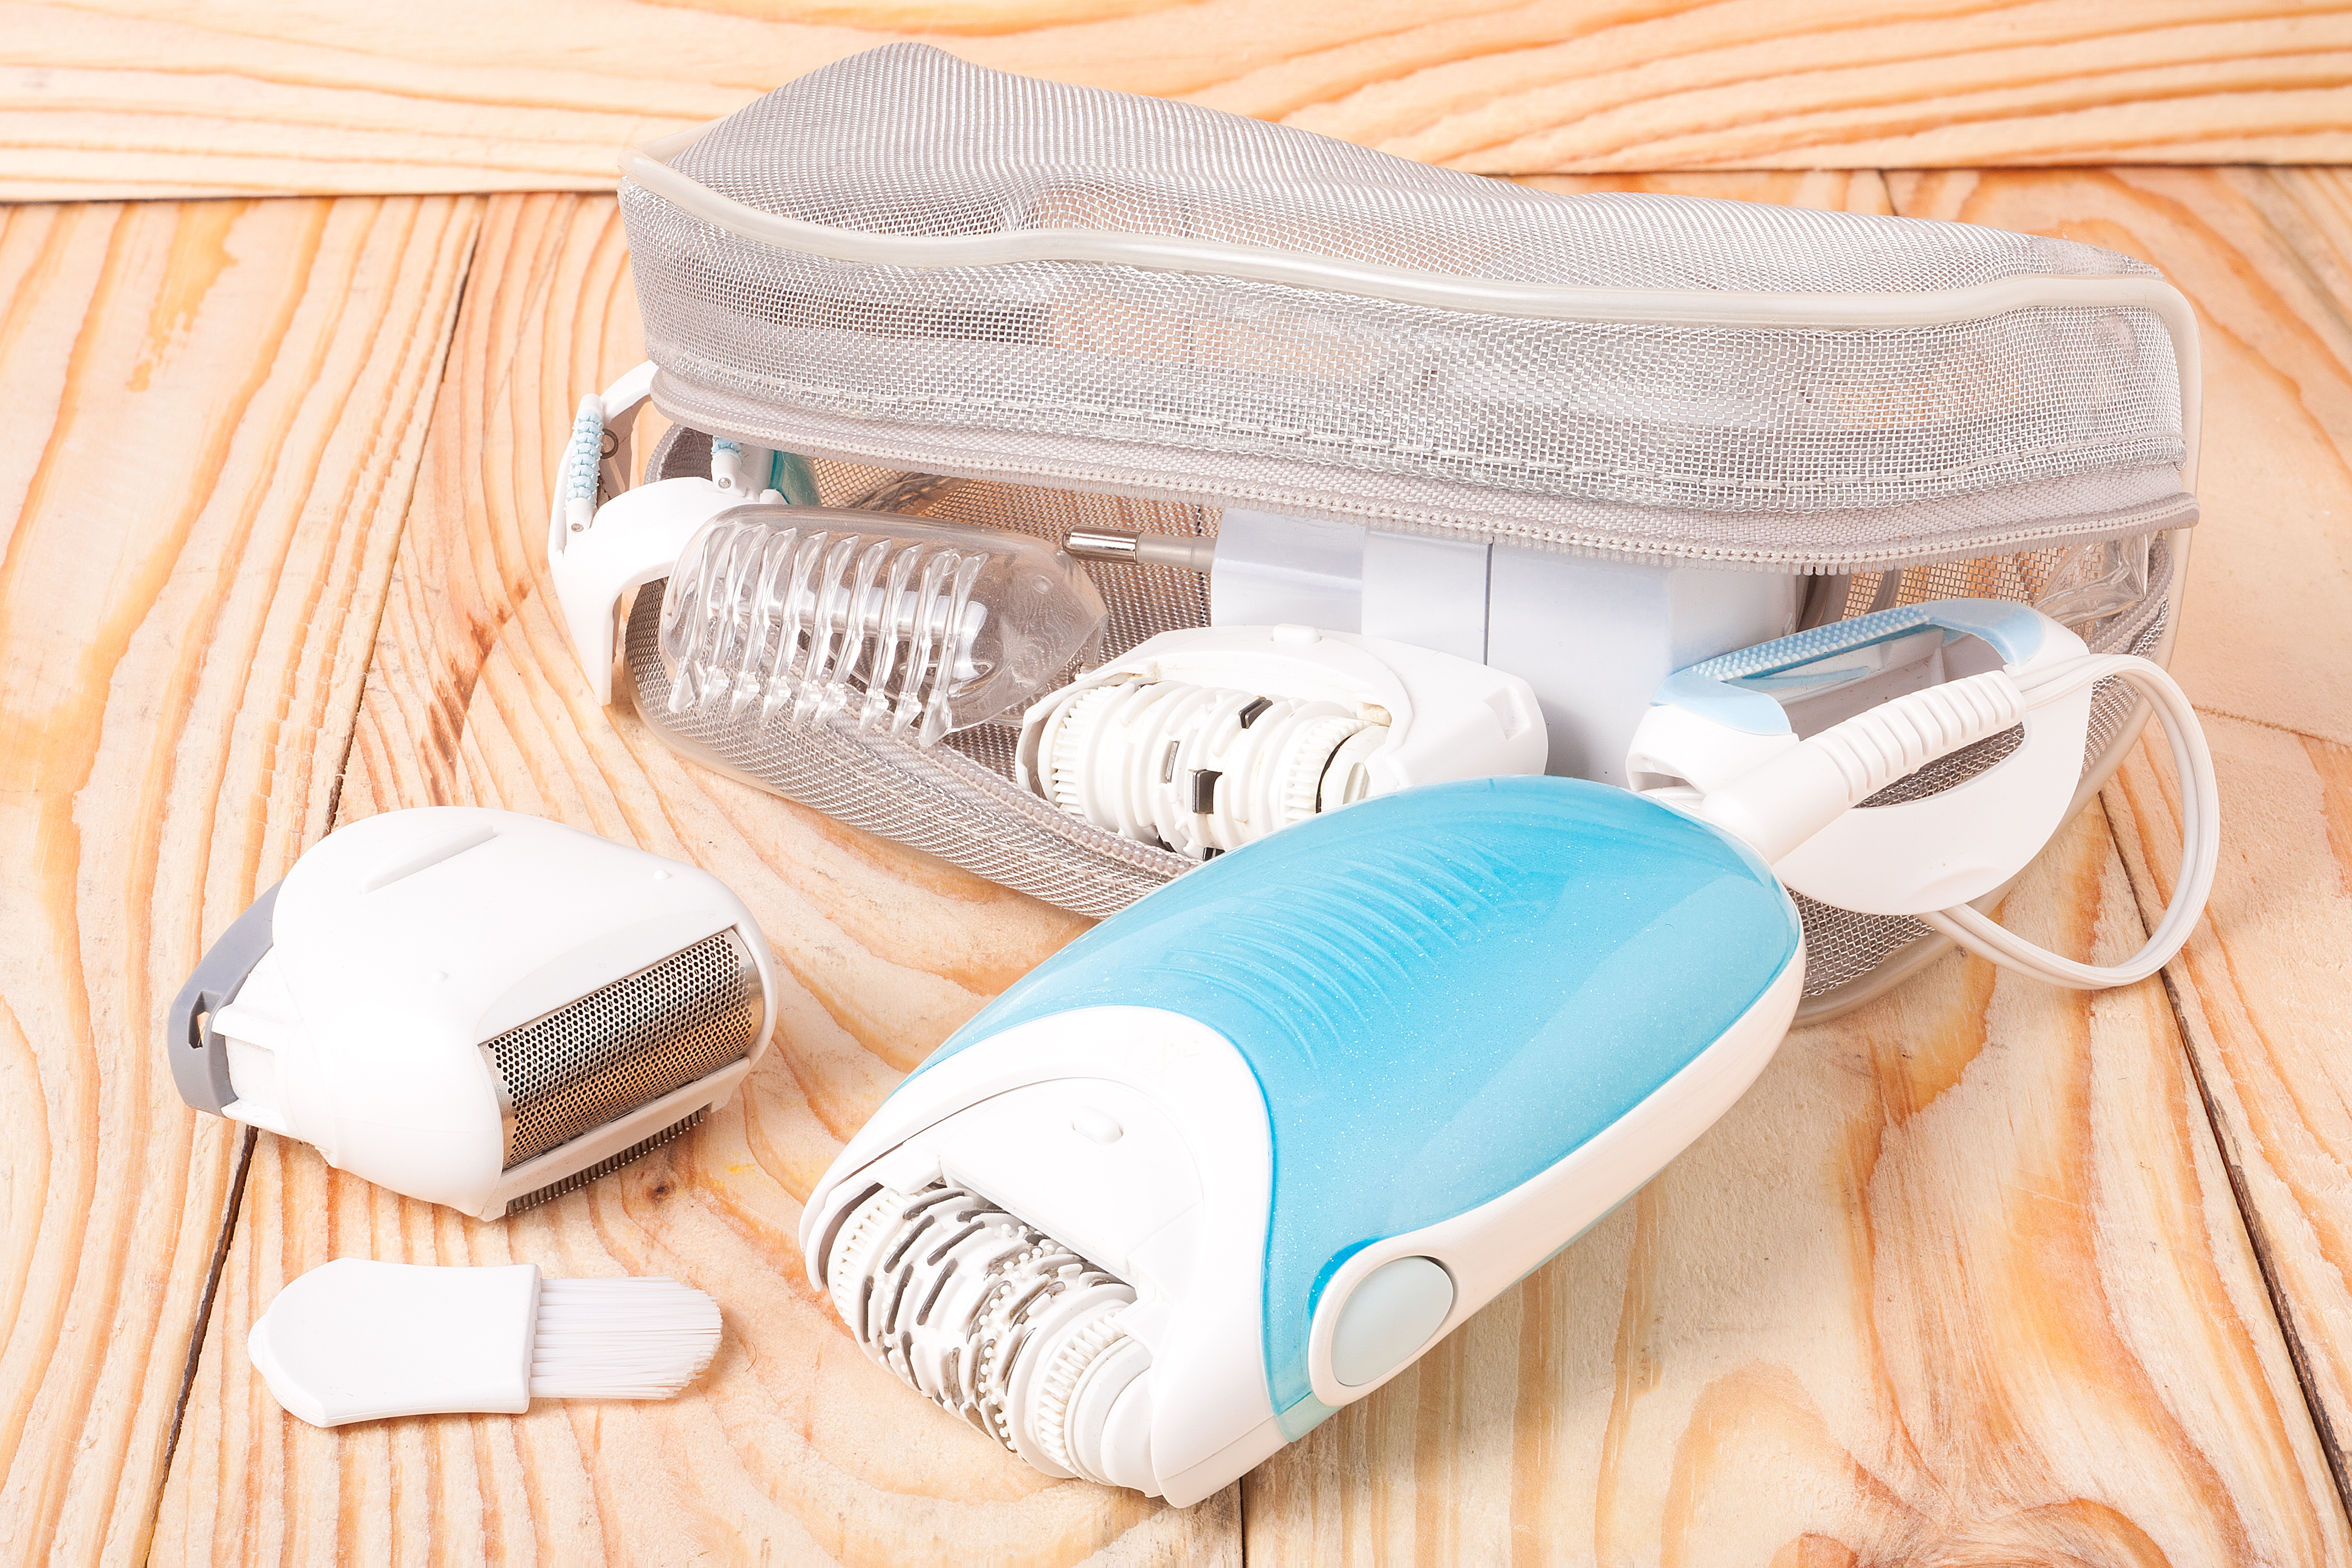 How to use an epilator without pain